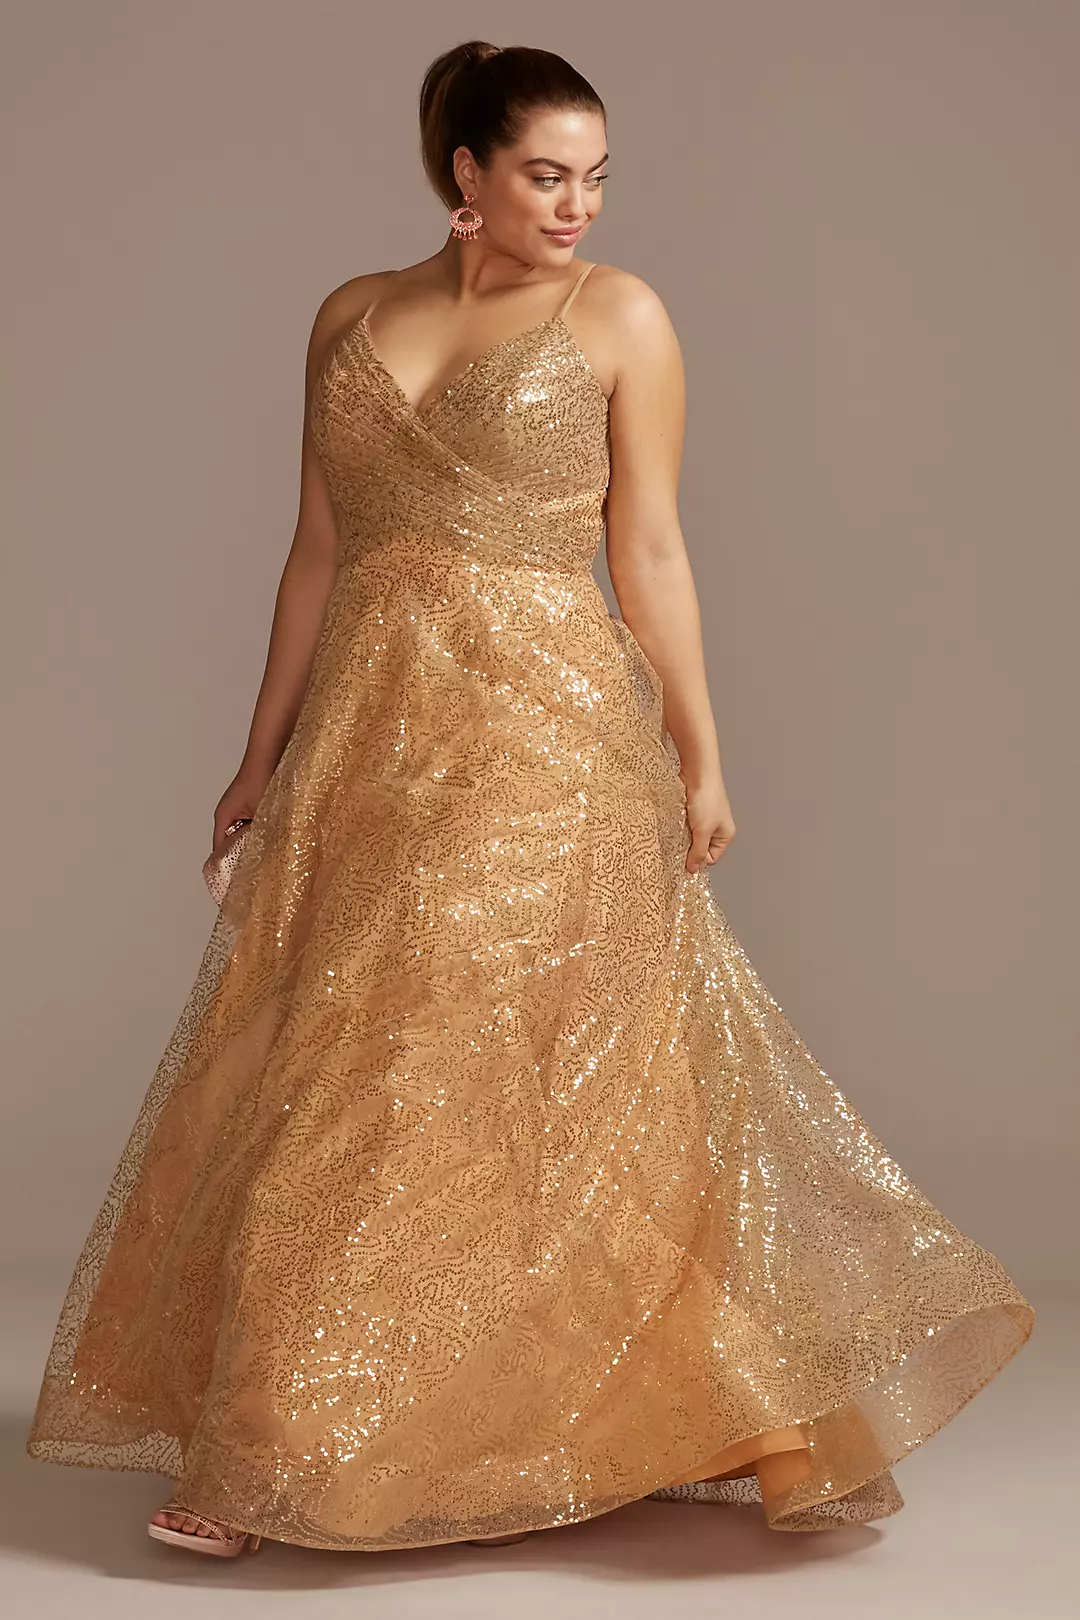 Sequin Spaghetti Strap Low Back Ball Gown Image